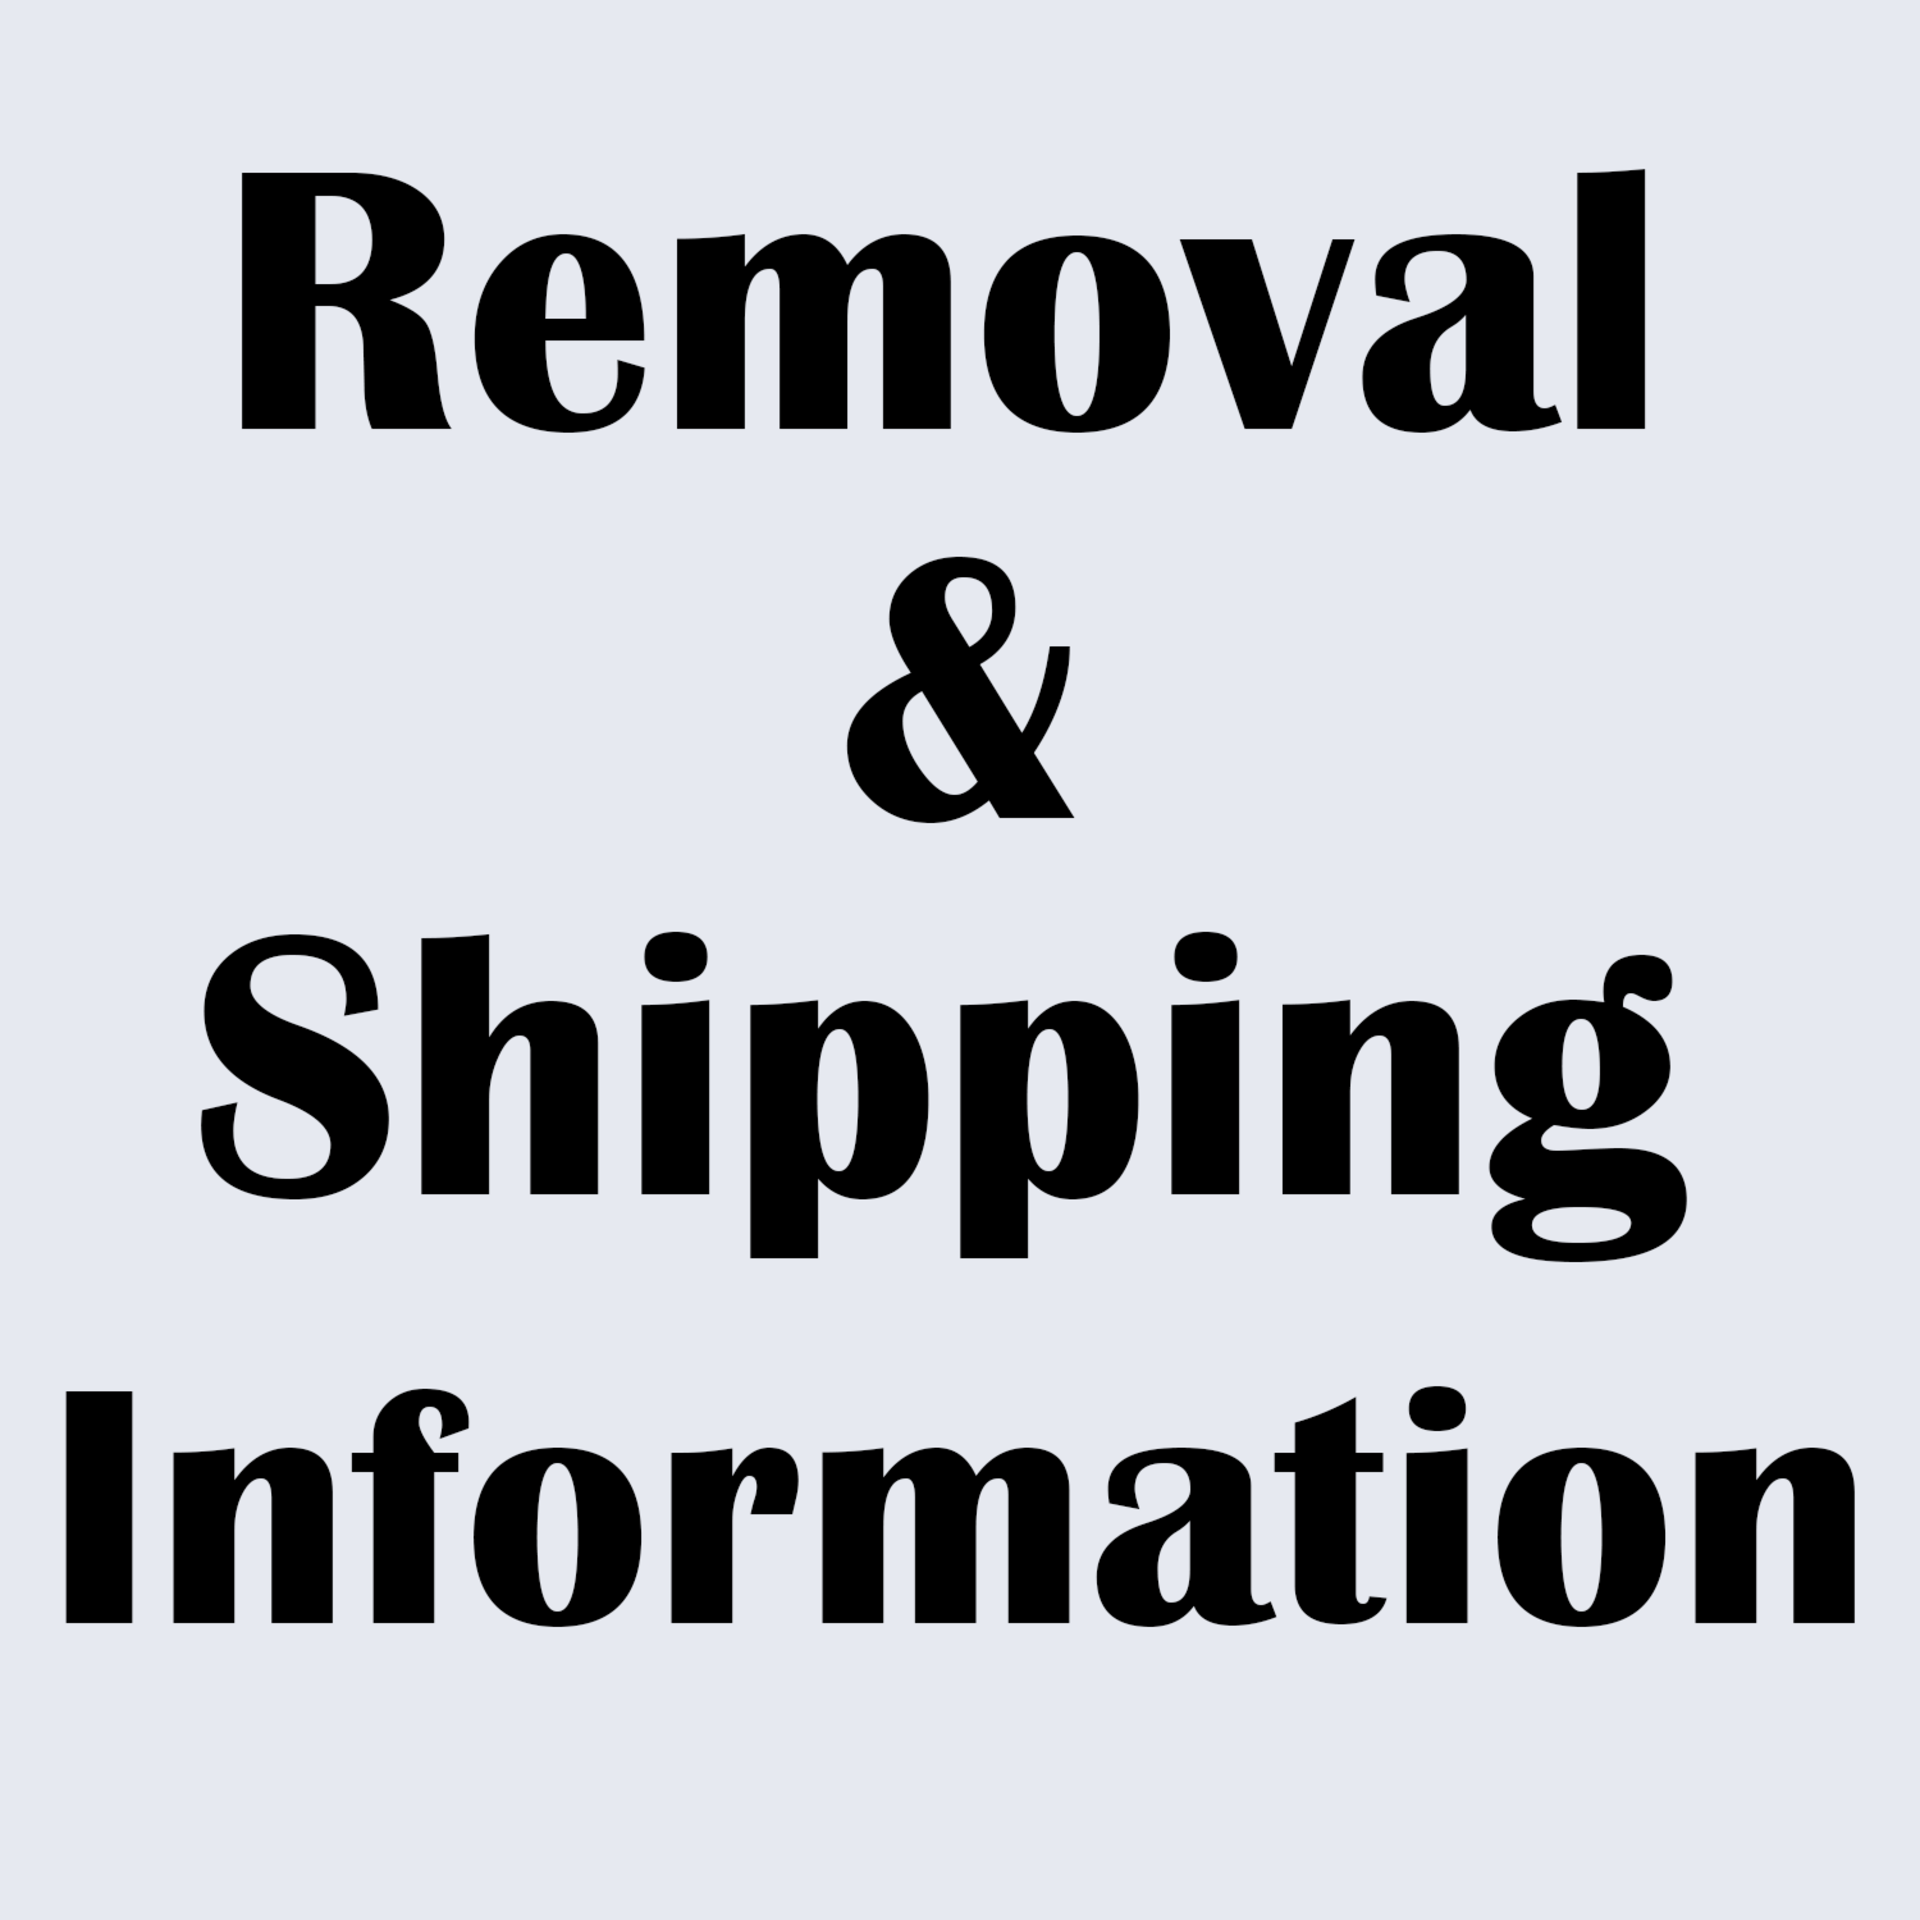 Removal and Shipping Information